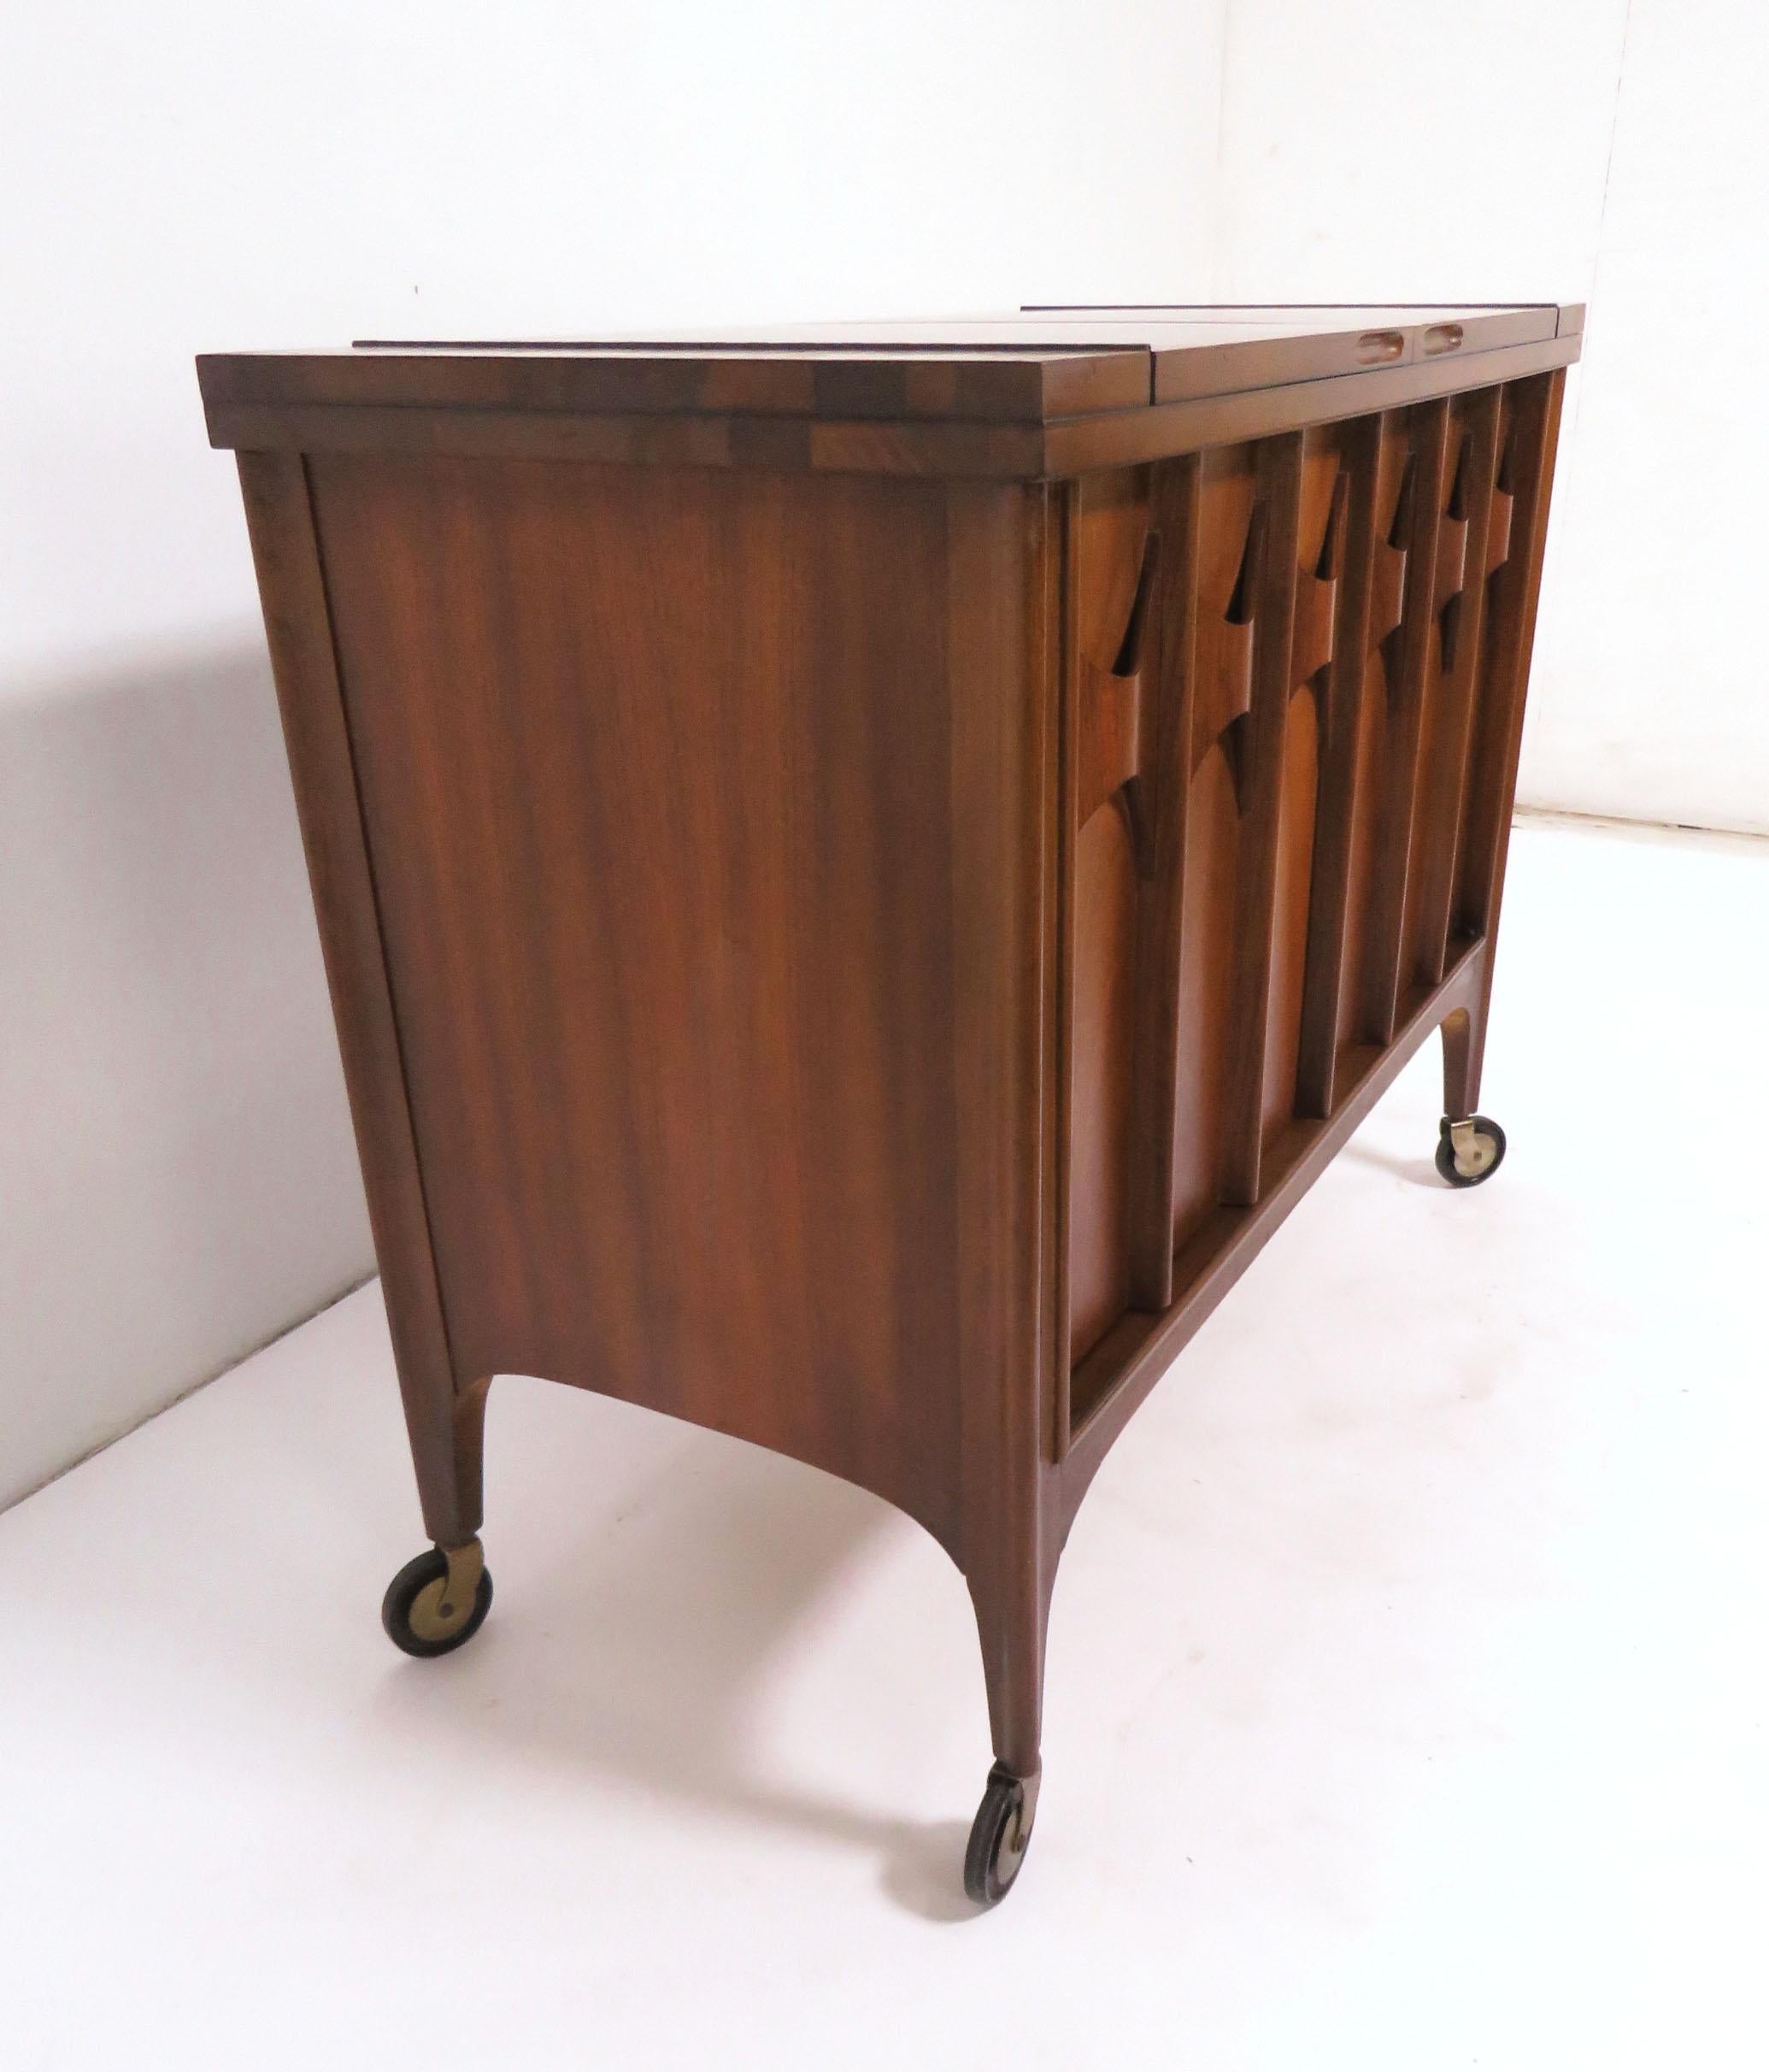 Laminate Mid-Century Modern Bar / Drinks Serving Cart with Expandable Top by Kent Coffey